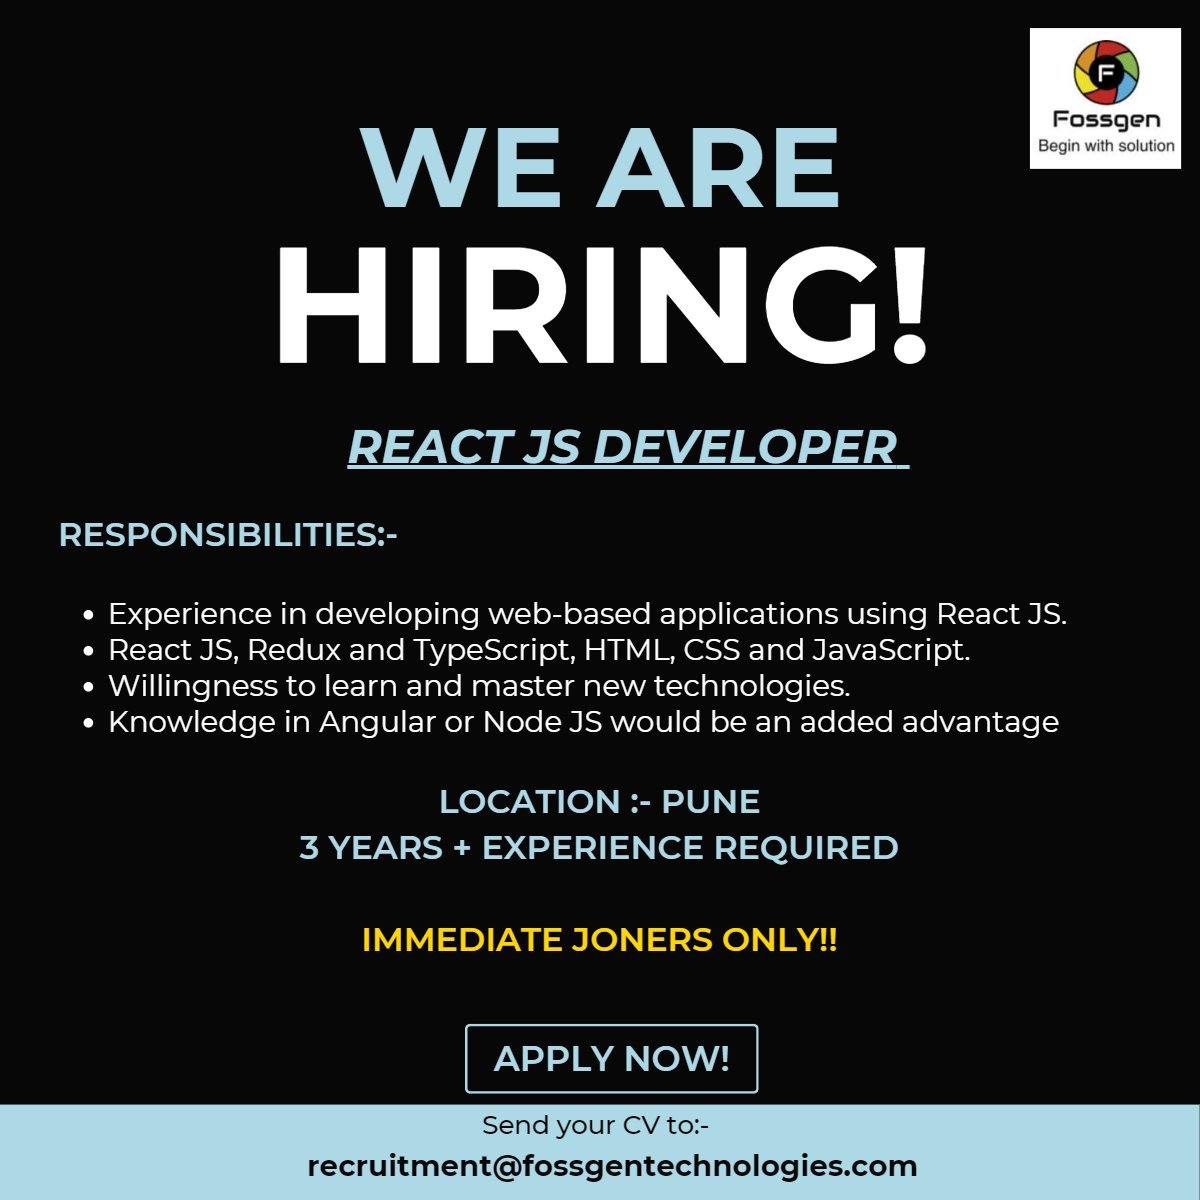 Urgently Looking for ReactJs Developer.
Experience: 3to 5 yrs
Location: Pune
Immediate Joiner required
Interested can mail their resume to recruitment@fossgentechnologies.com
#experience #engineer #devops #immediatejoiner #pune #resume #recruitment